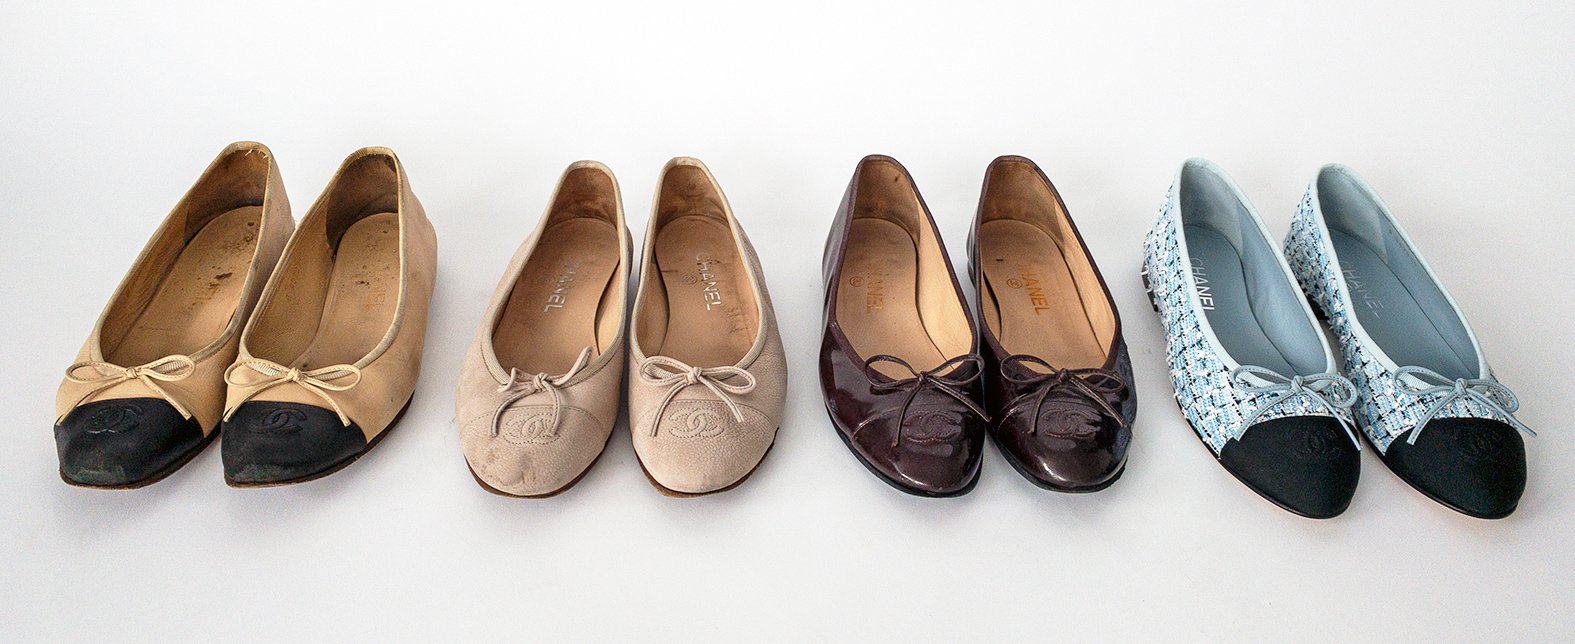 Chanel Ballet Flats Review: Sizing 